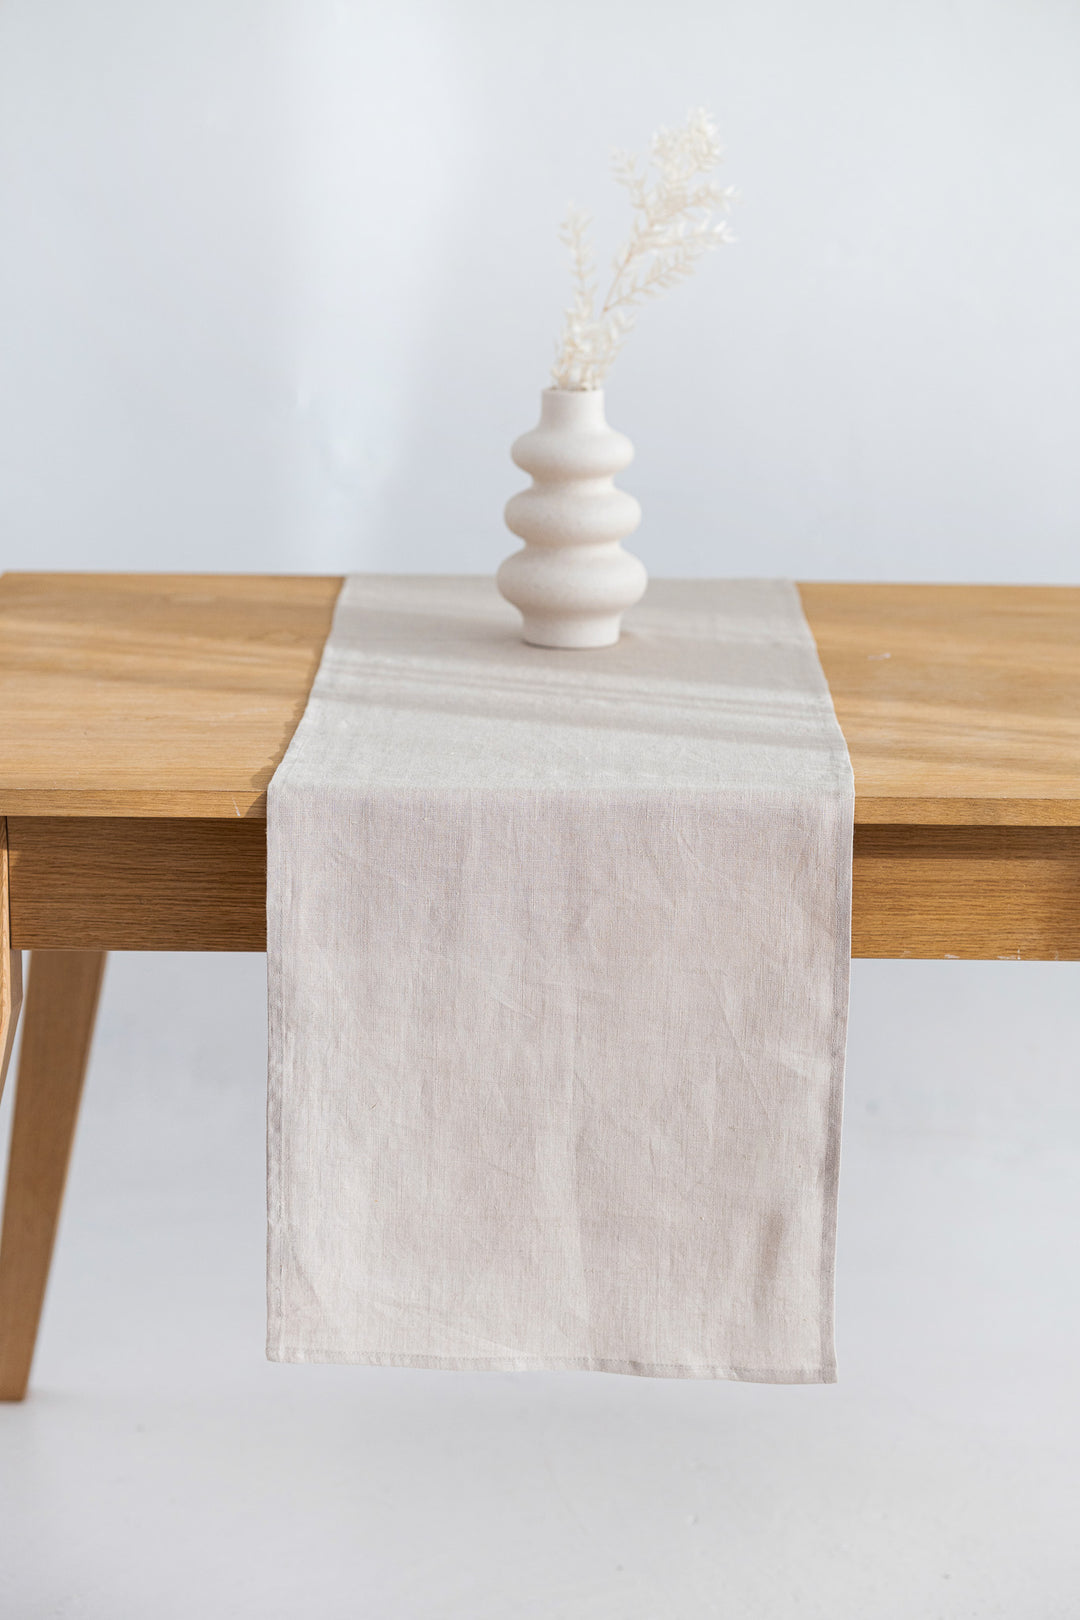 Linen Table Runner On Table In Natural Color - Daily Linen